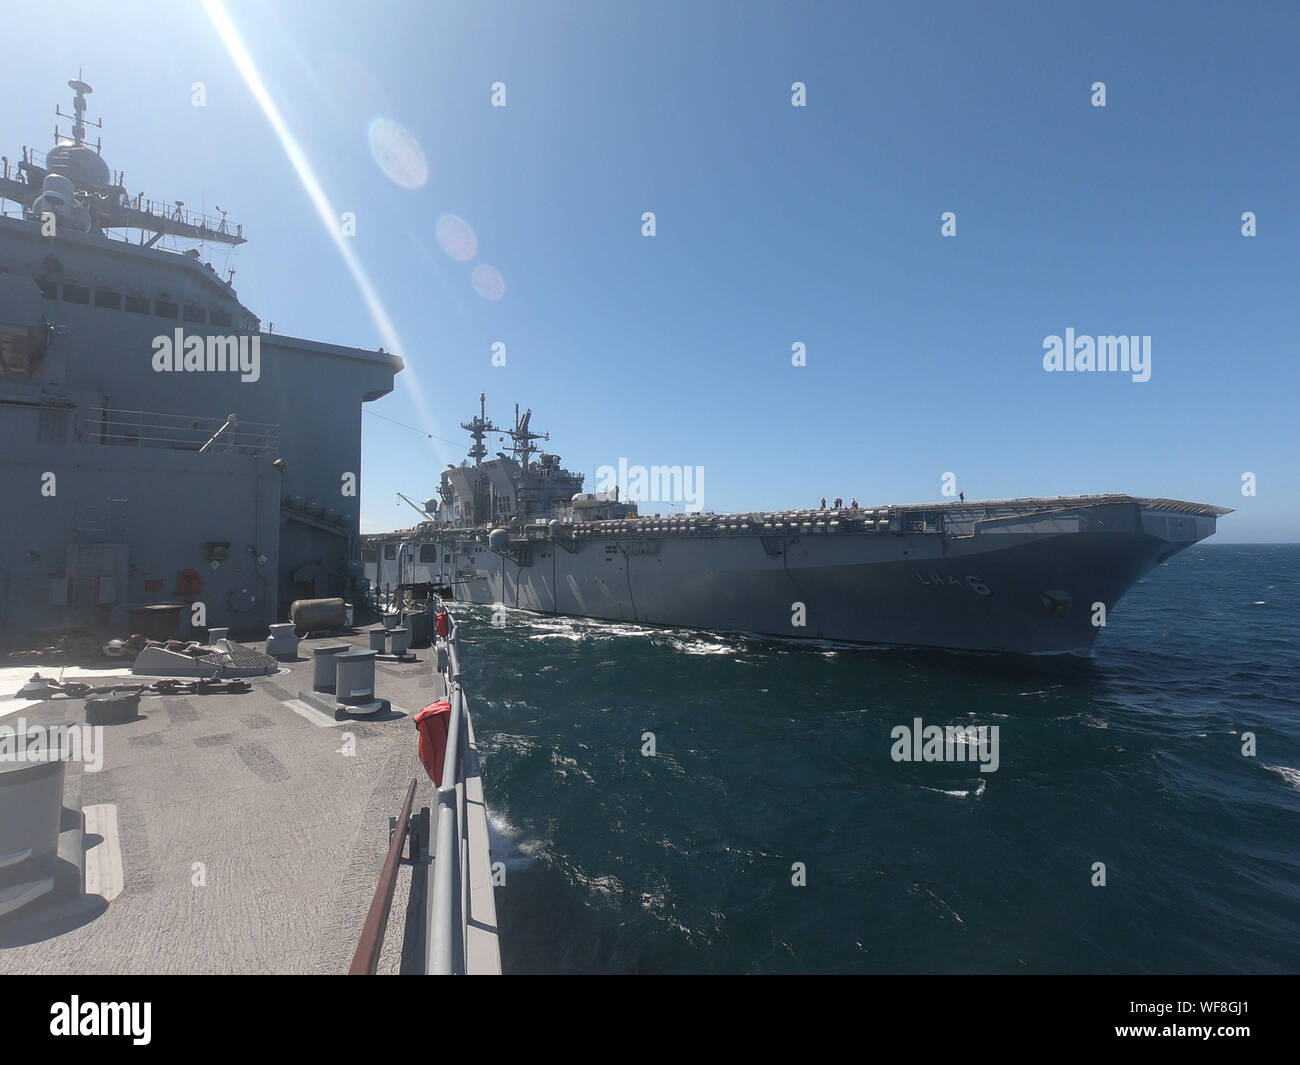 190820-N-XN177-0210 PACIFIC OCEAN (Aug. 20, 2019) – The amphibious assault ship USS America (LHA 6) steams alongside the dock landing ship USS Comstock (LSD 45) during a replenishment at sea evolution. Comstock is currently underway conducting routine operations. This year USS Comstock will participate in the U.S. Navy Fleet Week in Los Angeles. (U.S. Navy Photo by Mass Communication Specialist 1st Class Peter Burghart/Released) Stock Photo